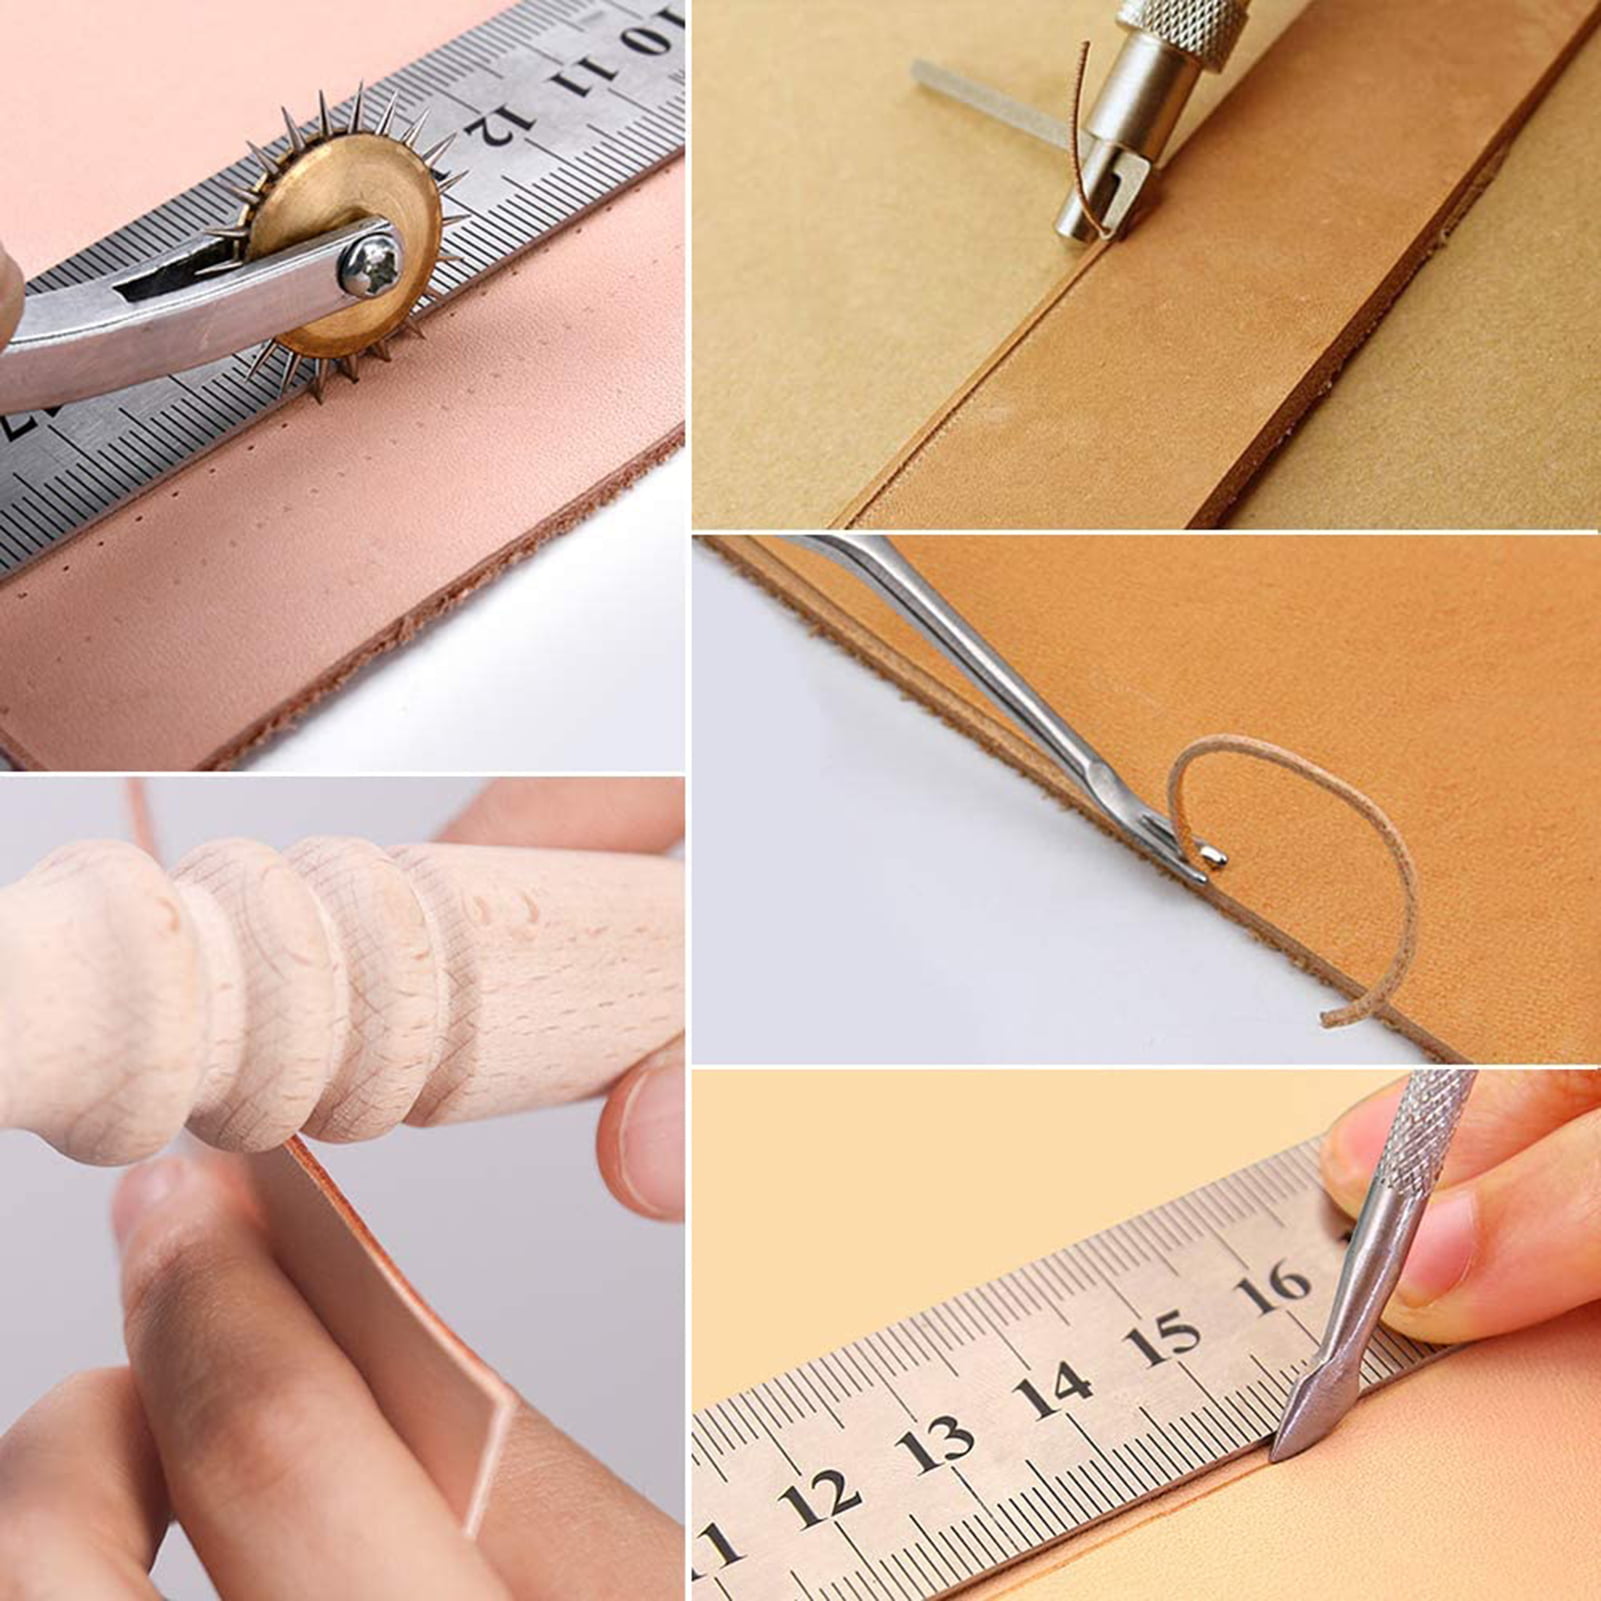 Carevas Leather Stitching Tool Hand Stitcher Sewing Awl Upholstery  Stitching Sewing Tool with 1 PCS Wax Thread 2 PCS Neddles for Leather Fabric